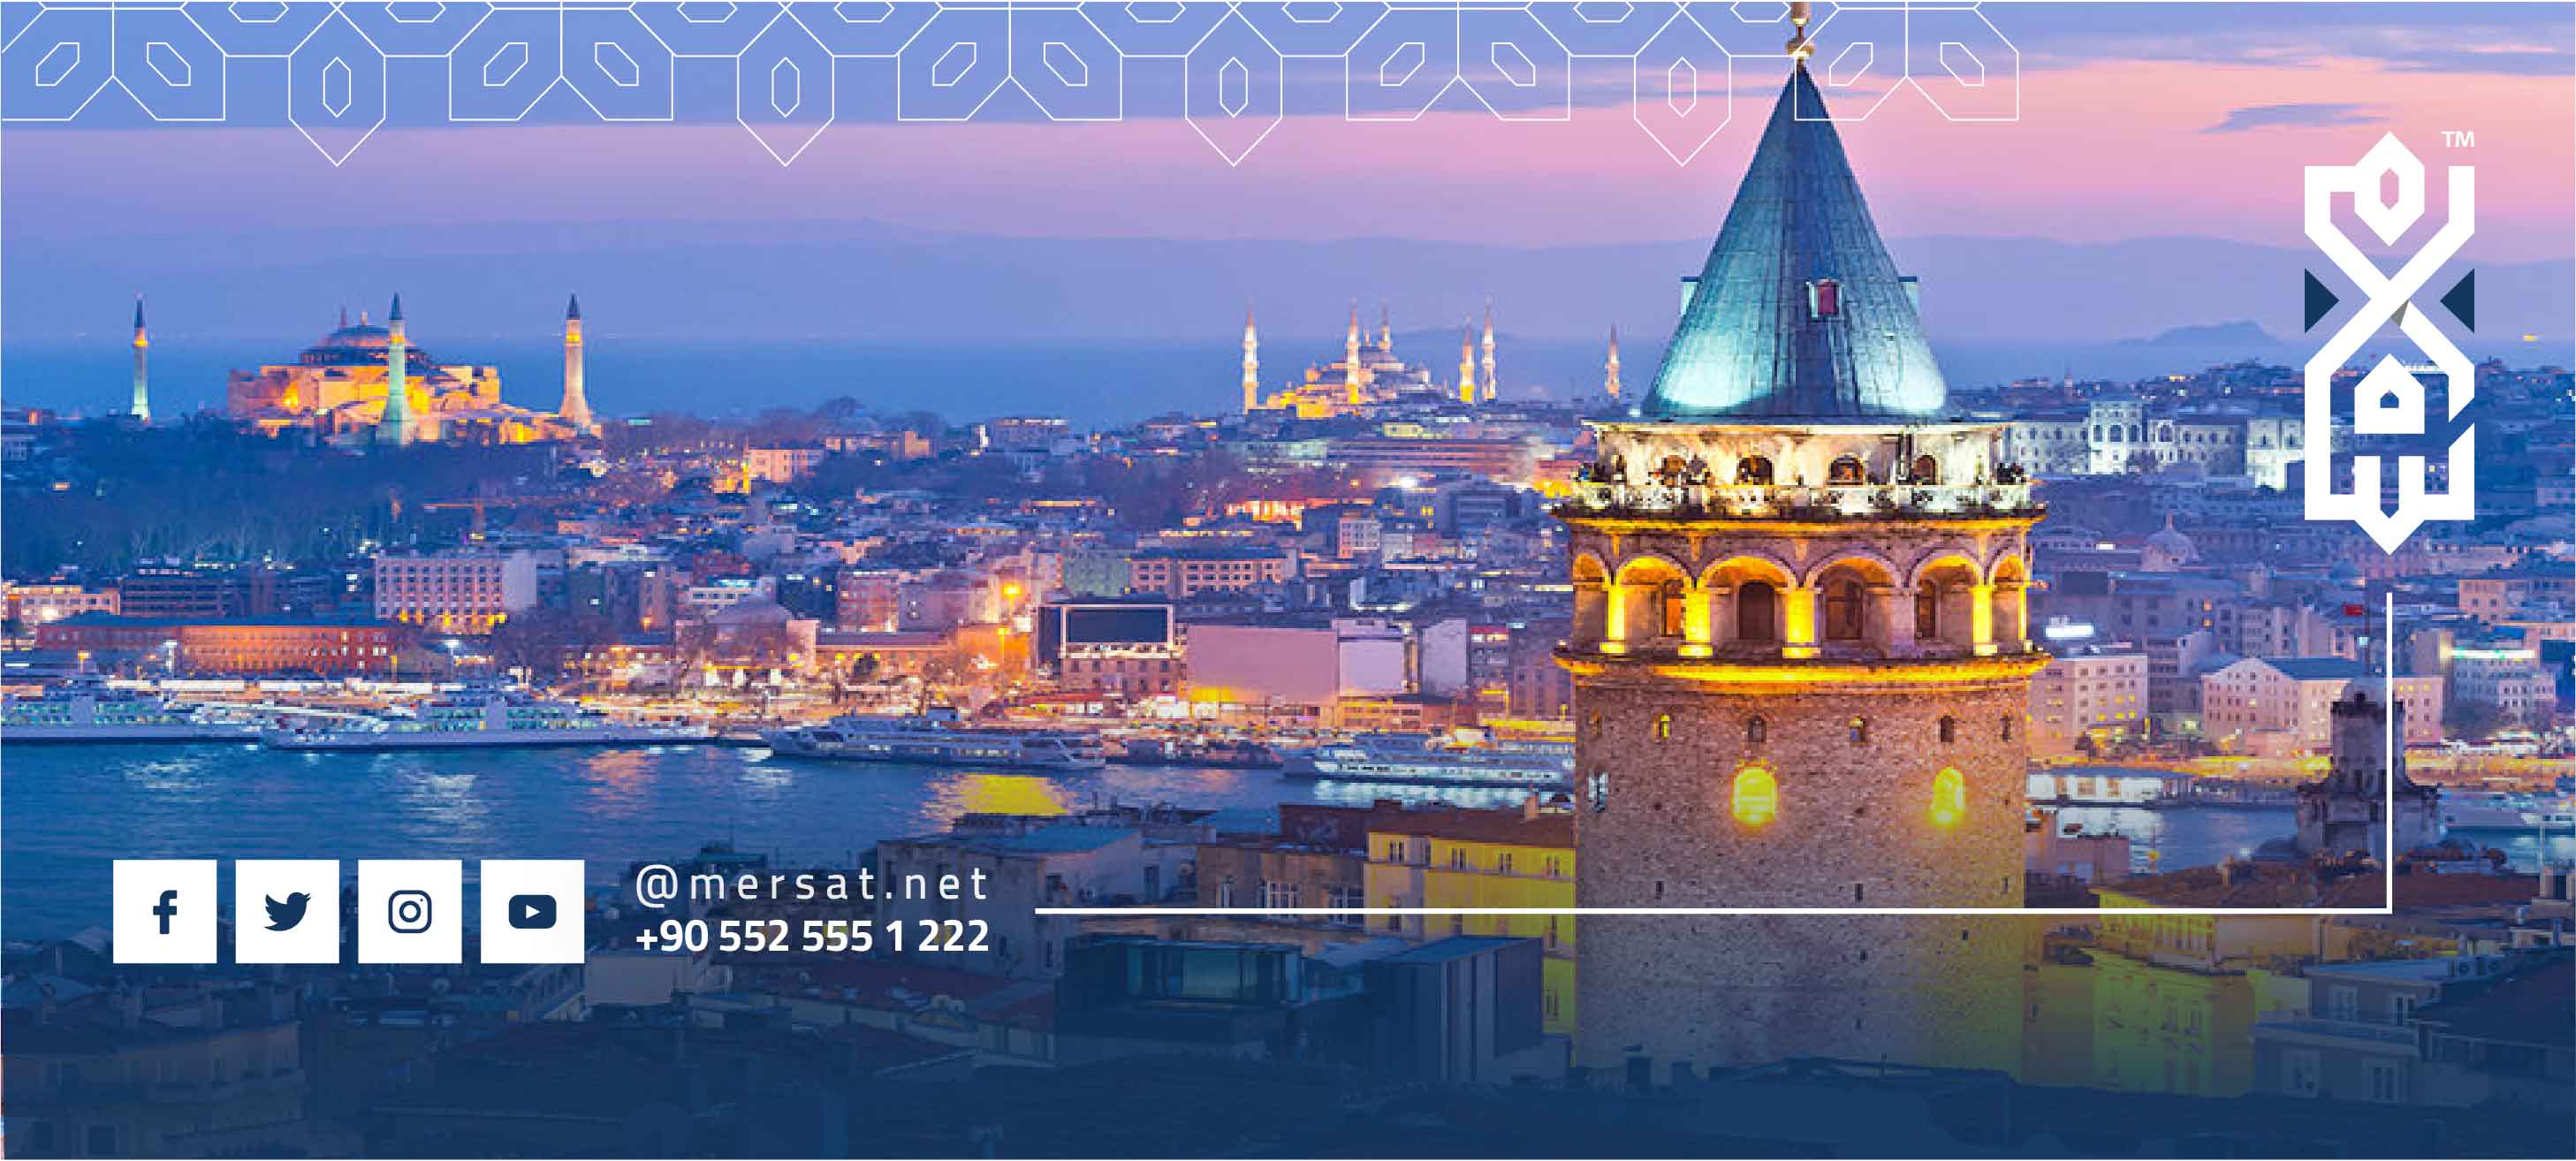 If you travel to Turkey, do not forget to visit these landmarks in Istanbul, Europe